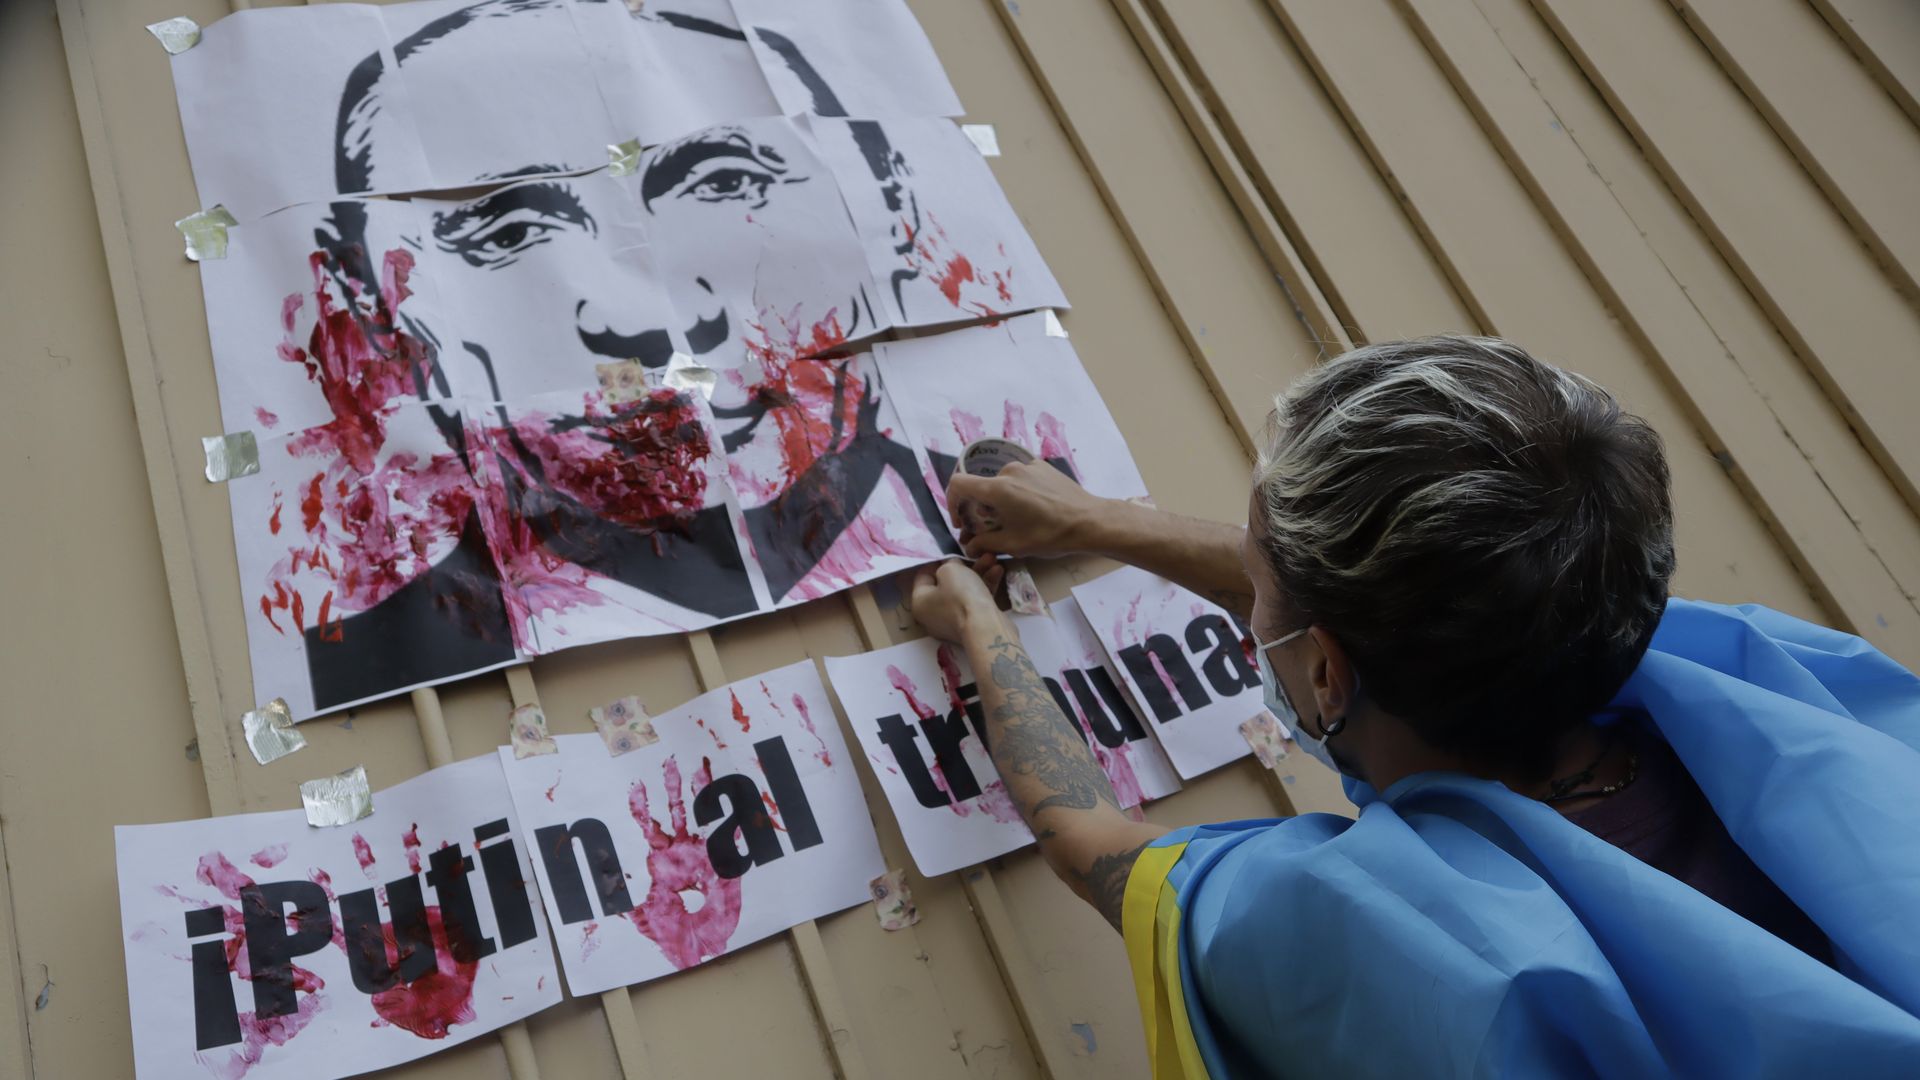 Photo of a person reaching for a large poster with Putin's face and red handprints all over it